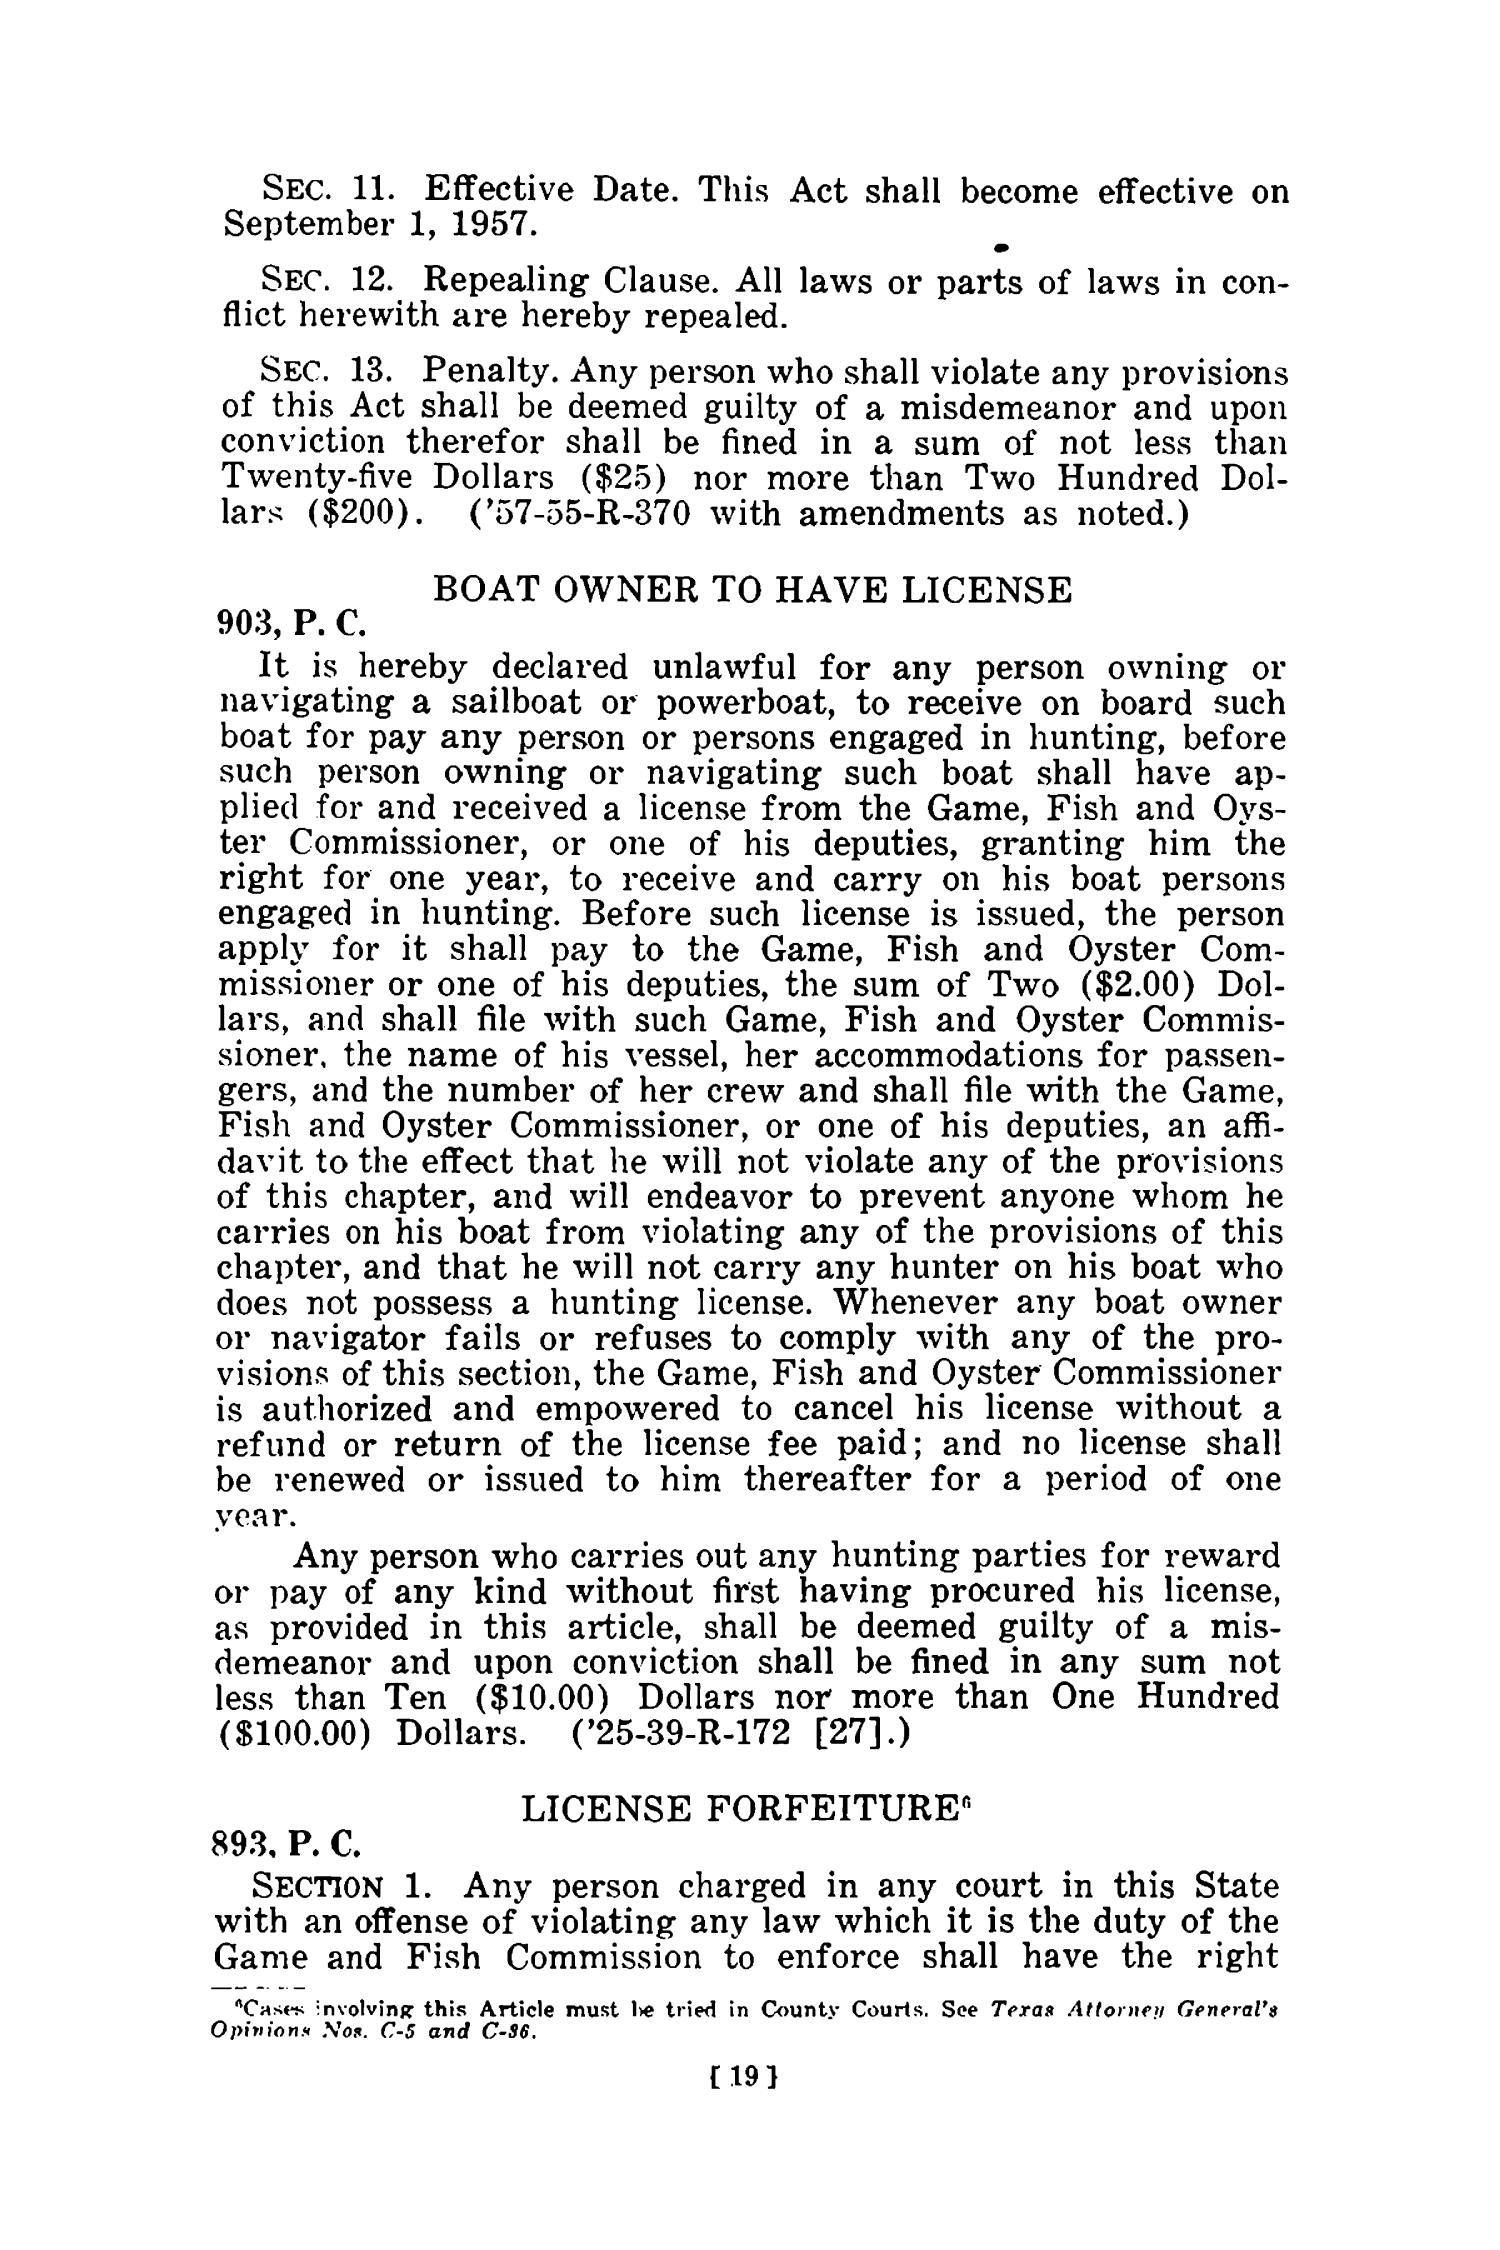 Full Text of the Game, Fish and Fur Laws of Texas with citations of Park Laws, 1965
                                                
                                                    19
                                                